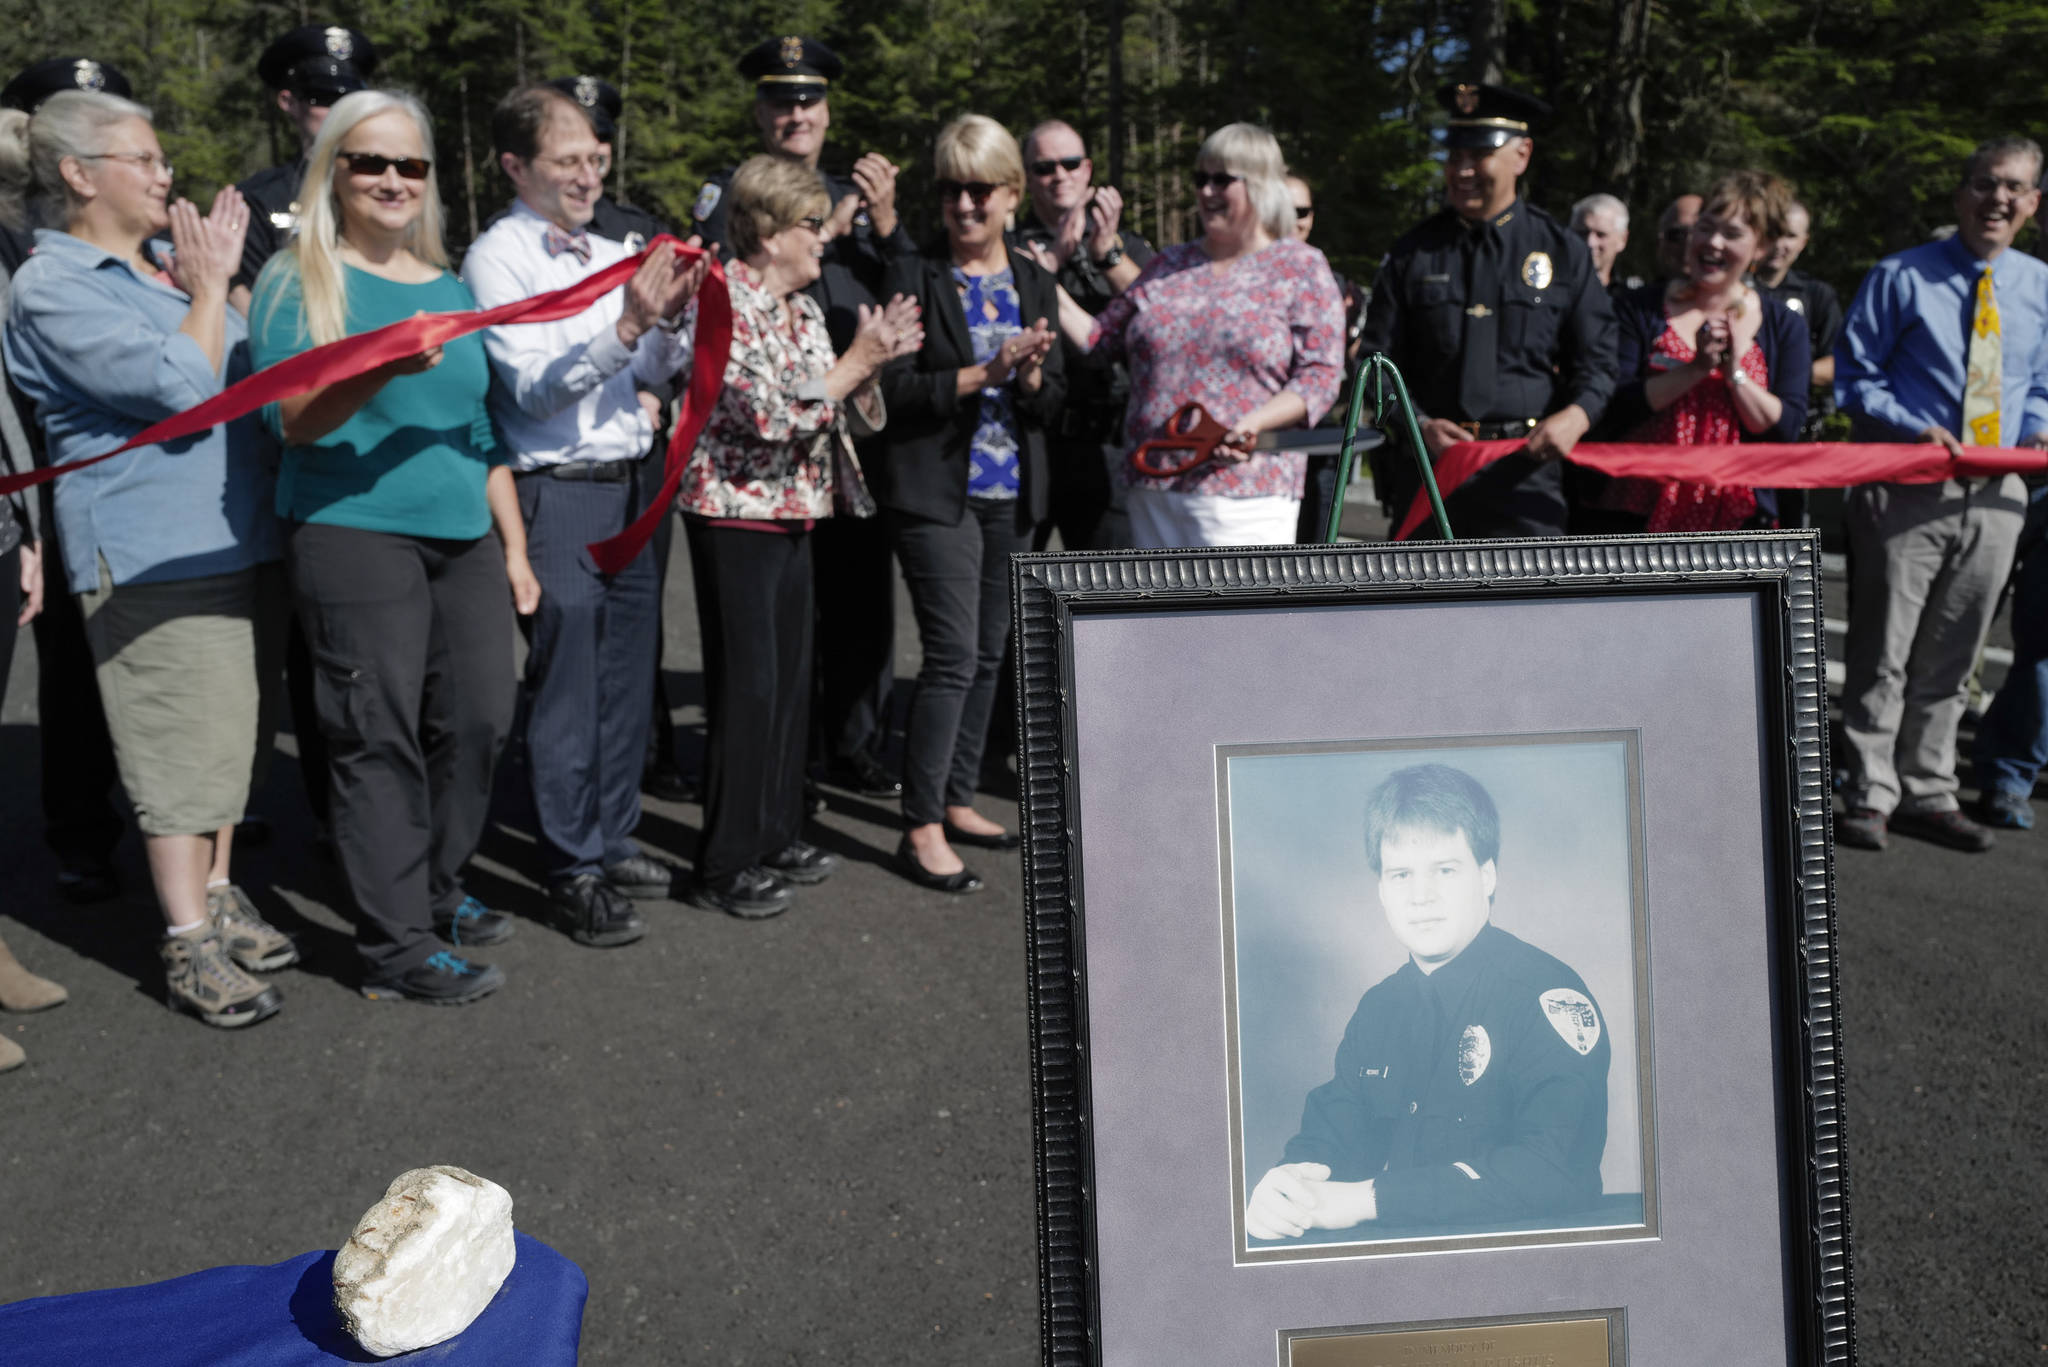 City and state officials attend a ribbon-cutting ceremony on Karl Reishus Boulevard to commemorate the near completion of the Pederson Hill Subdivision on Friday, Sept. 6, 2019. Reishus, pictured, was a Juneau Police Department officer who died in 1992 when he fell from a 40-foot tower during a training exercise. (Michael Penn | Juneau Empire)